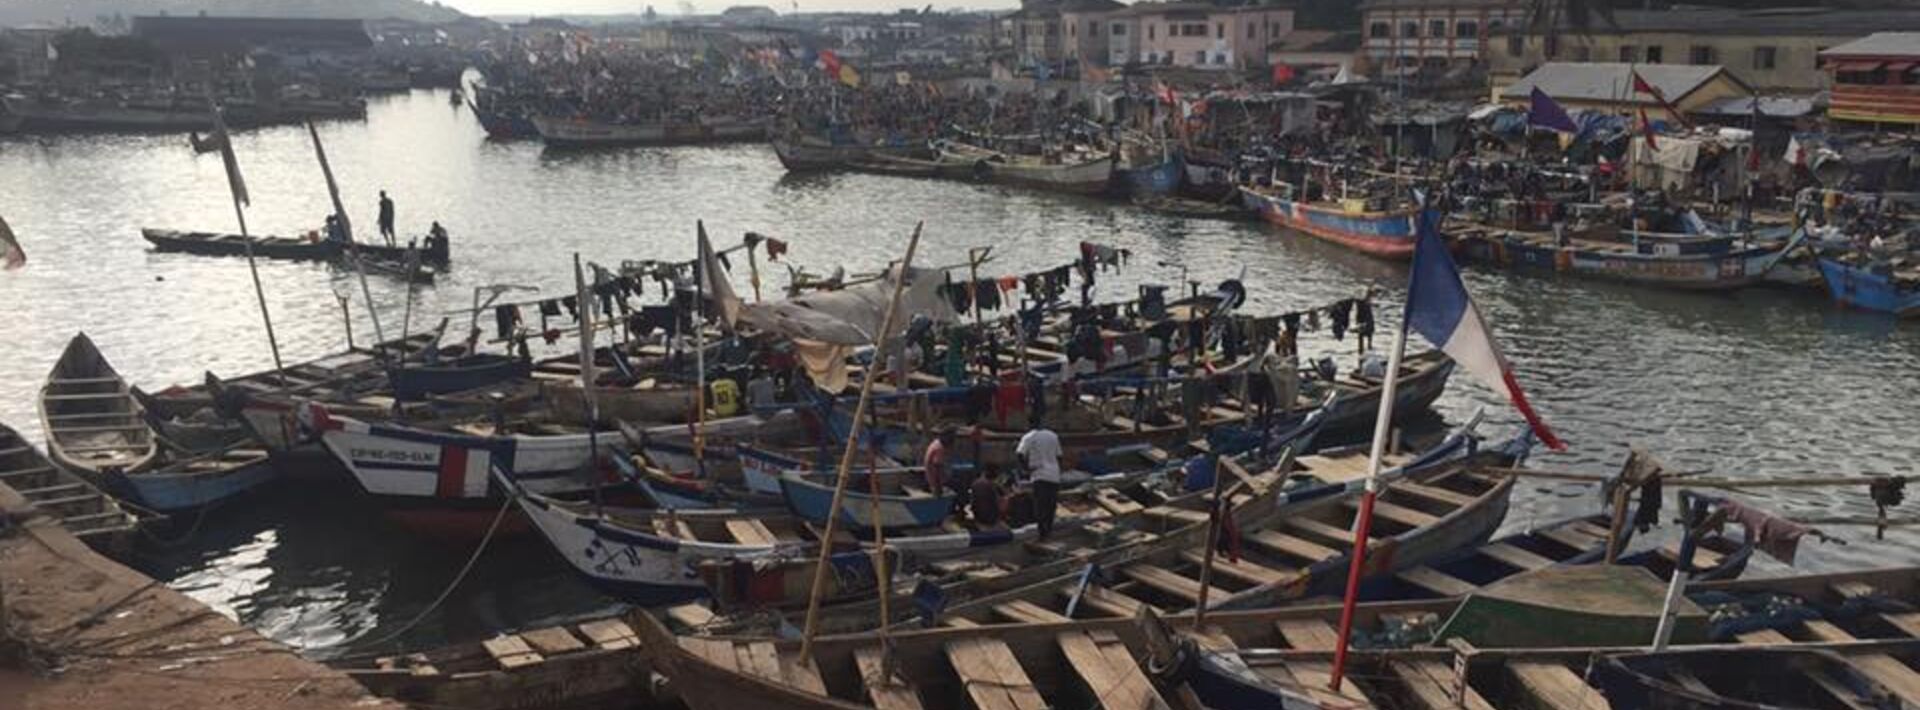 GHANA: Fishermen to receive digital gadgets to gather evidence on